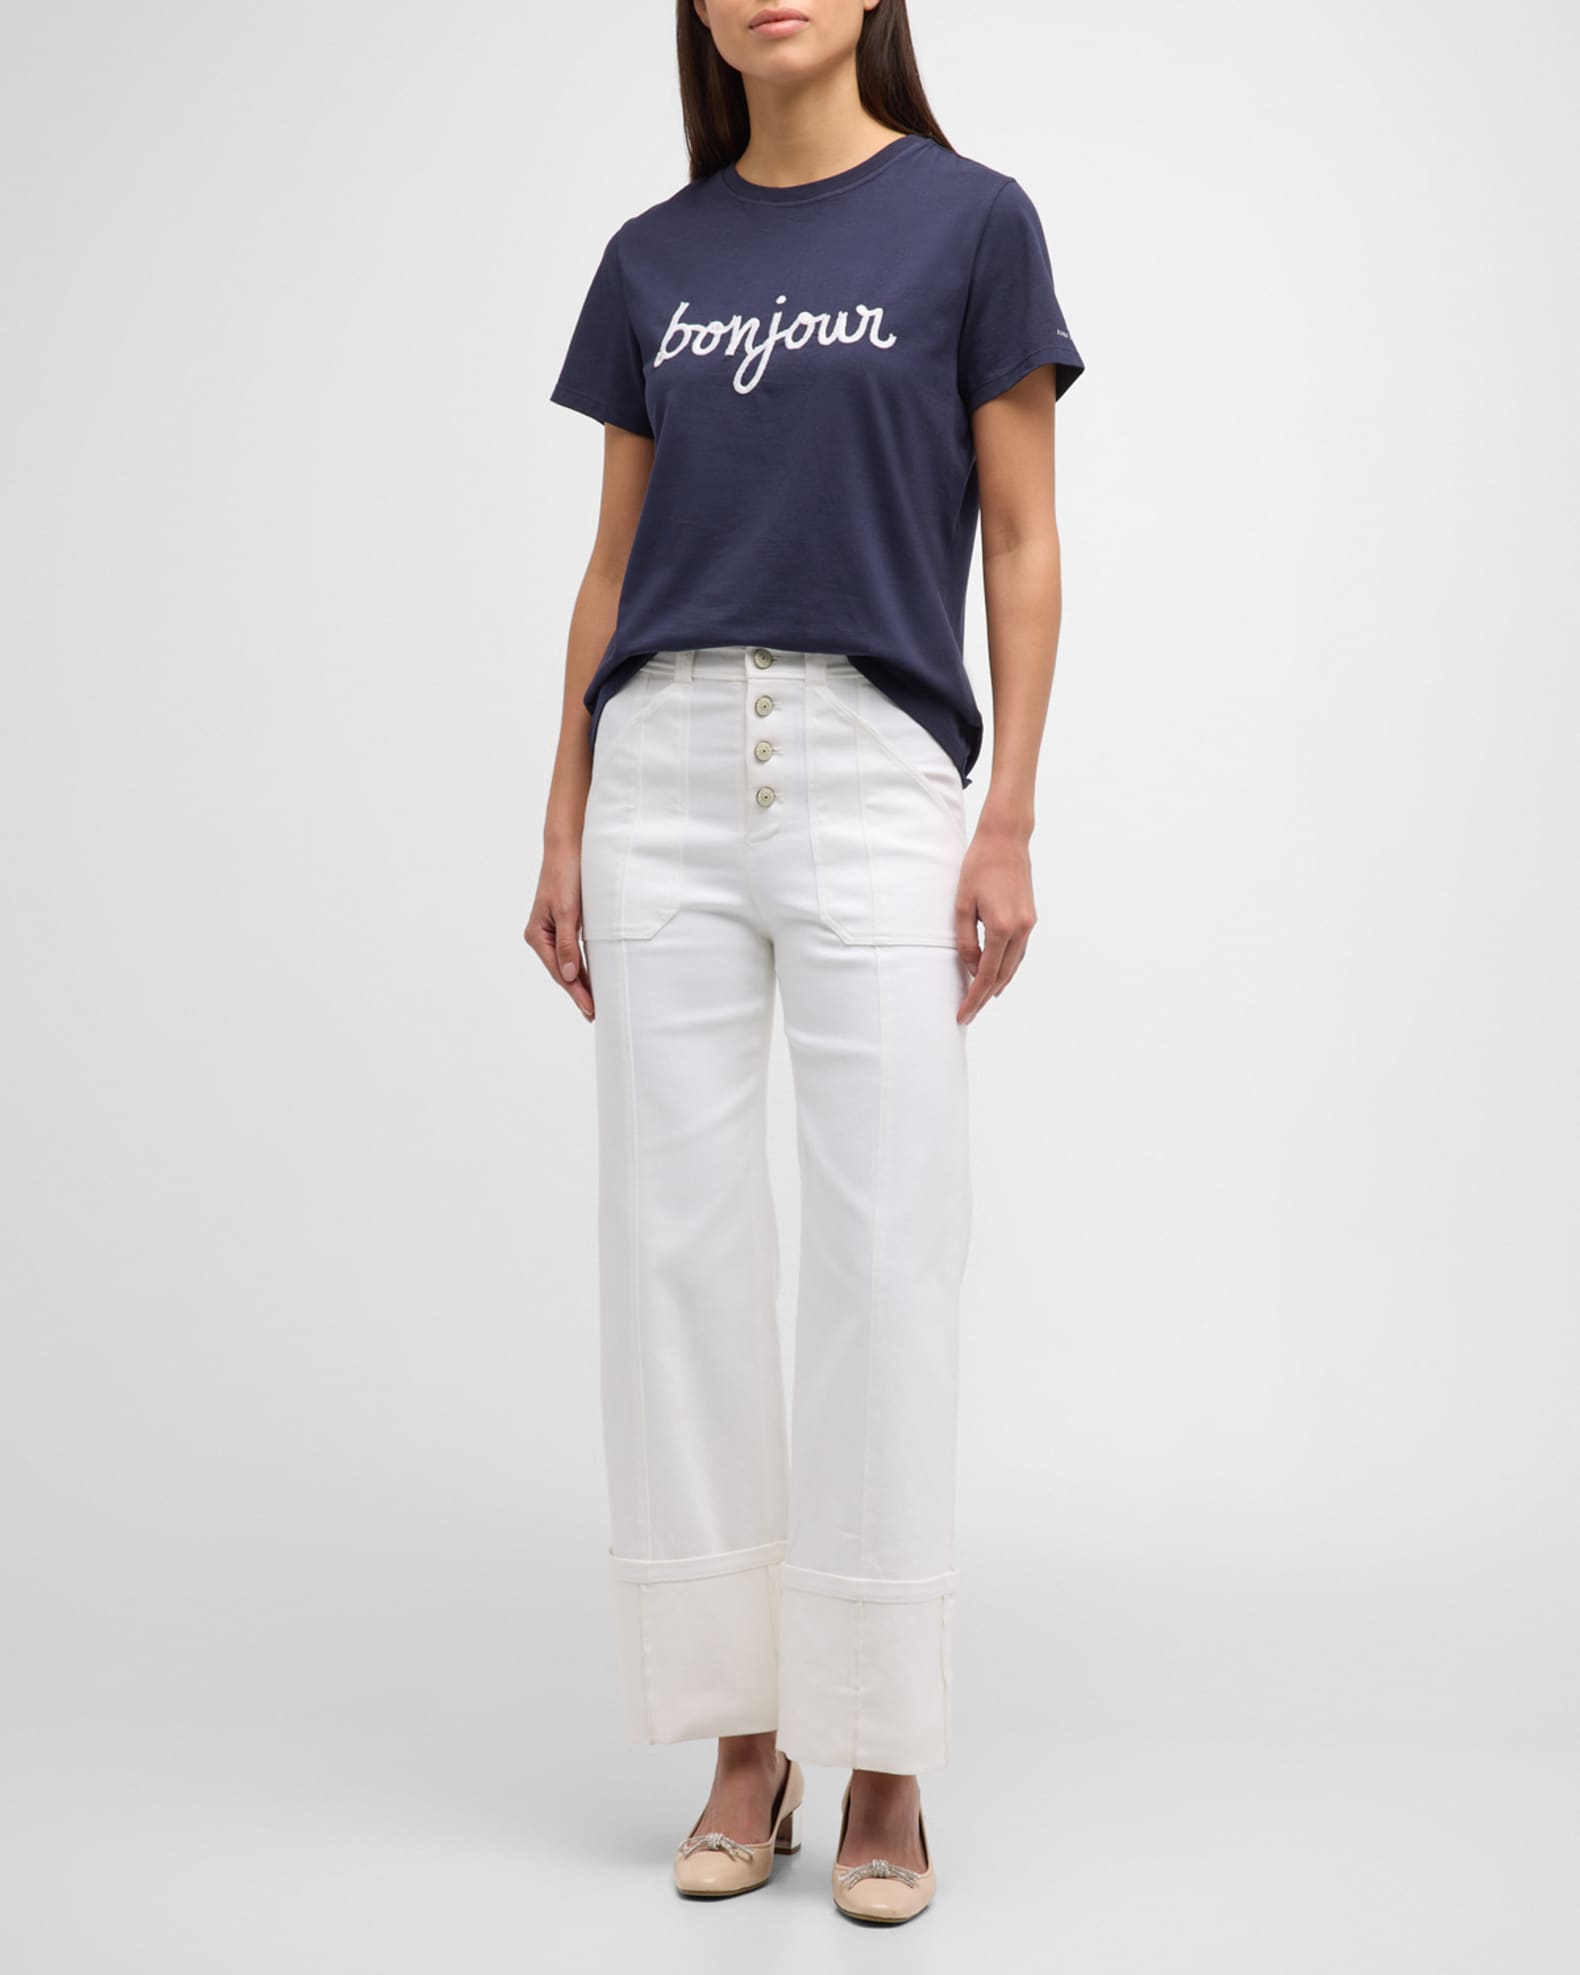 Sequined Bonjour Short-Sleeve Cotton Tee